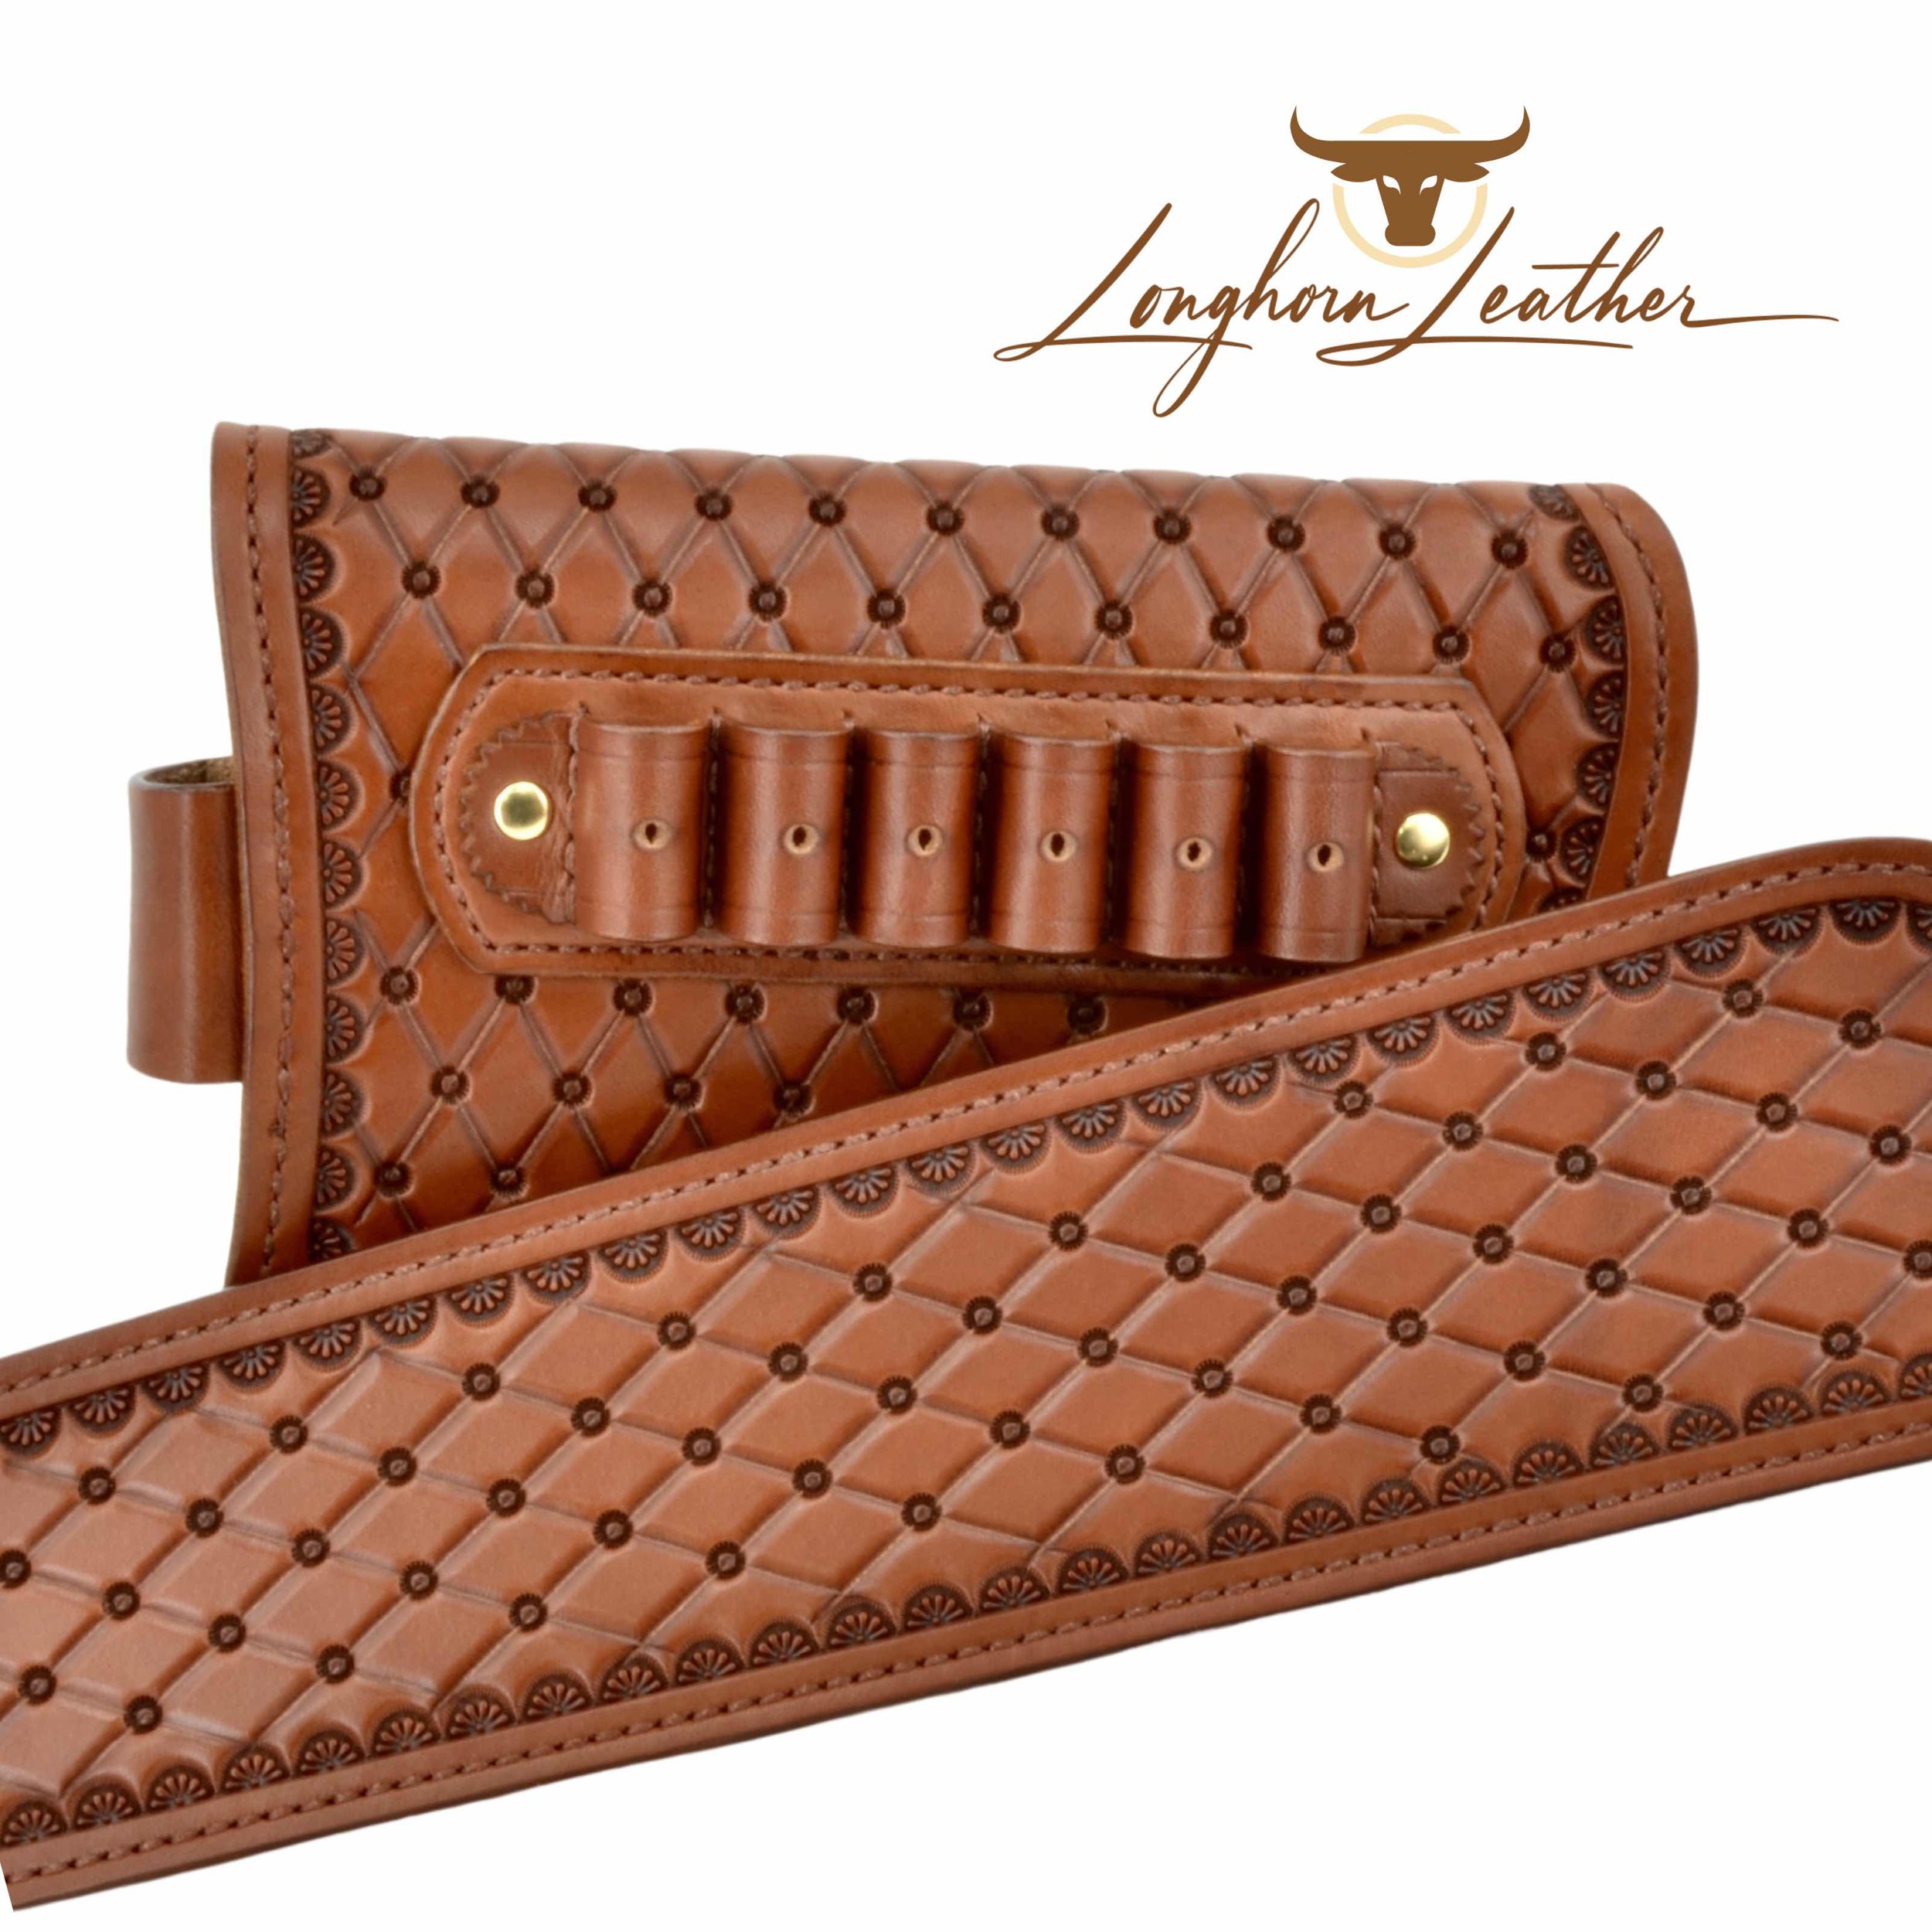 Custom leather gunstock cover and rifle sling featuring the San Carlos design. Individually handcrafted at Longhorn Leather AZ